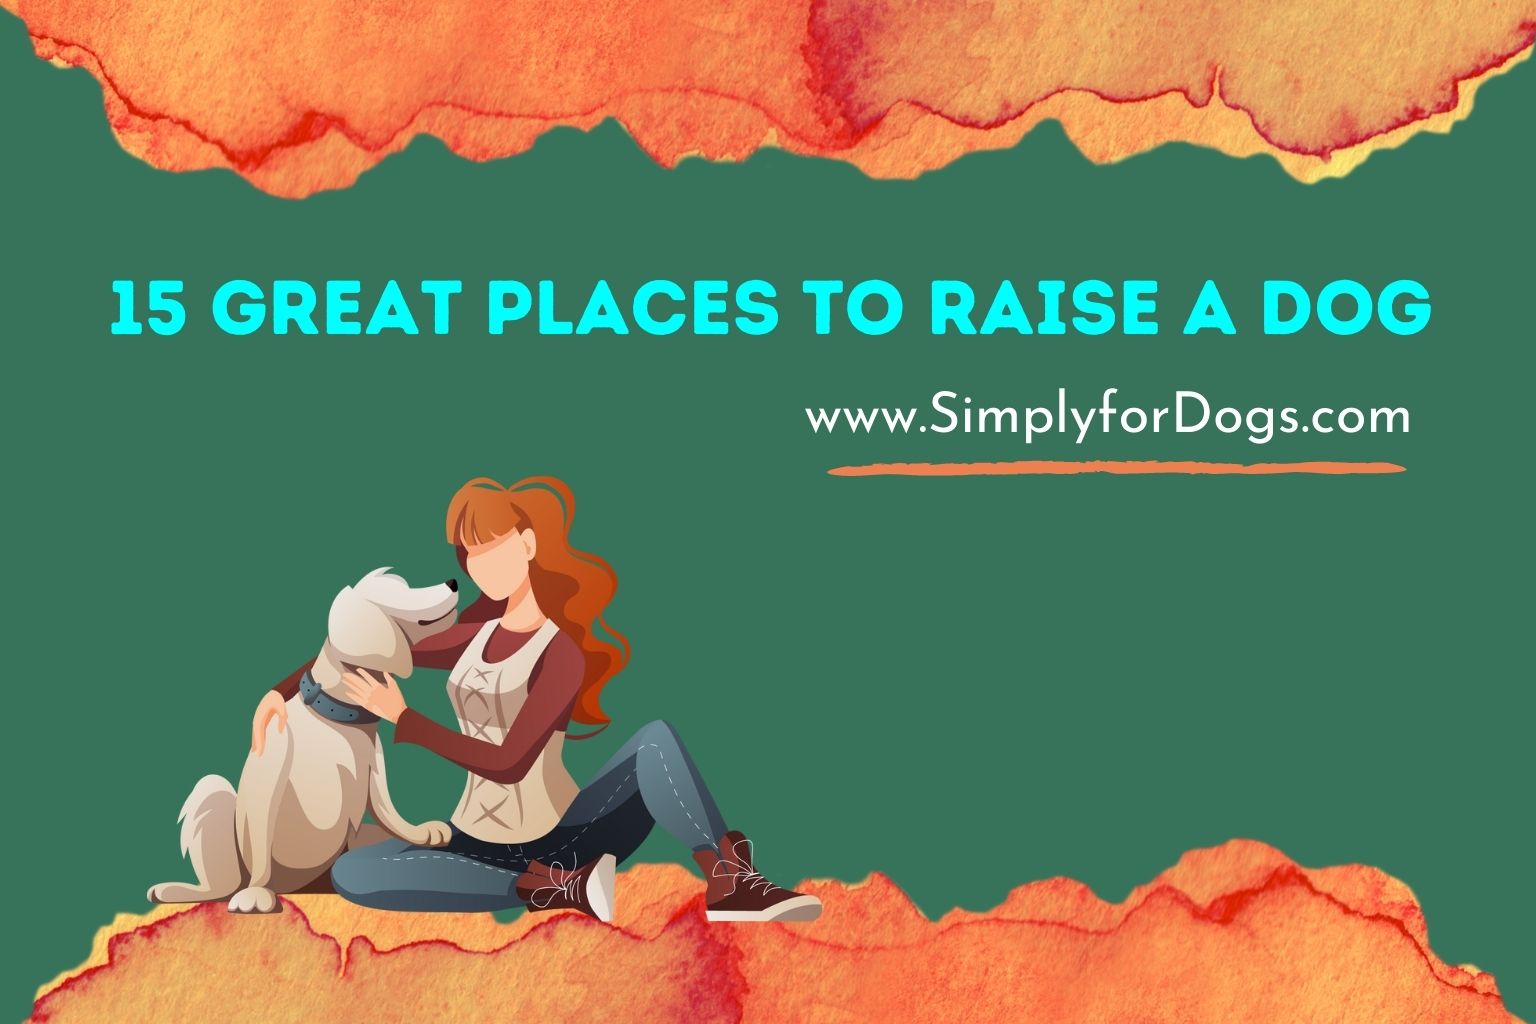 15 Great Places to Raise a Dog